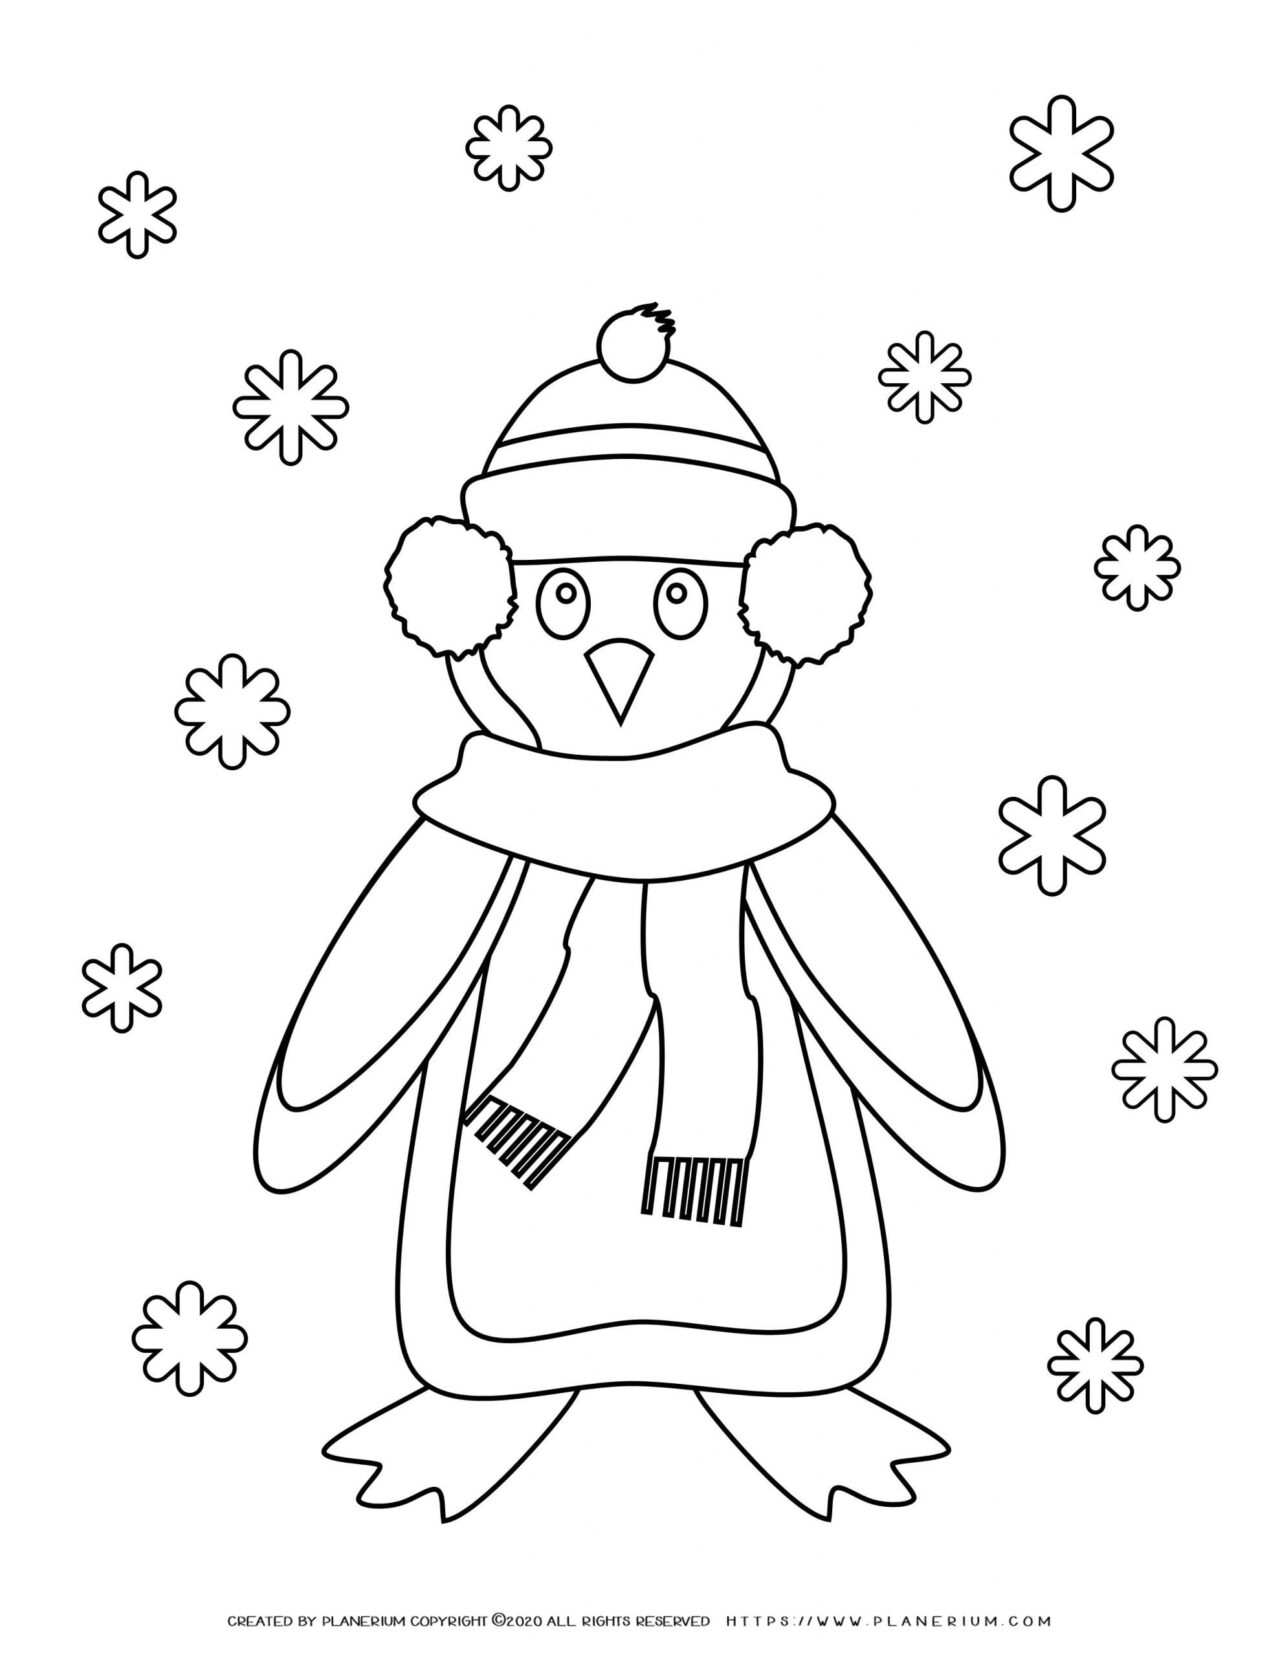 Winter Coloring Page - Penguin and Snowflakes | Planerium